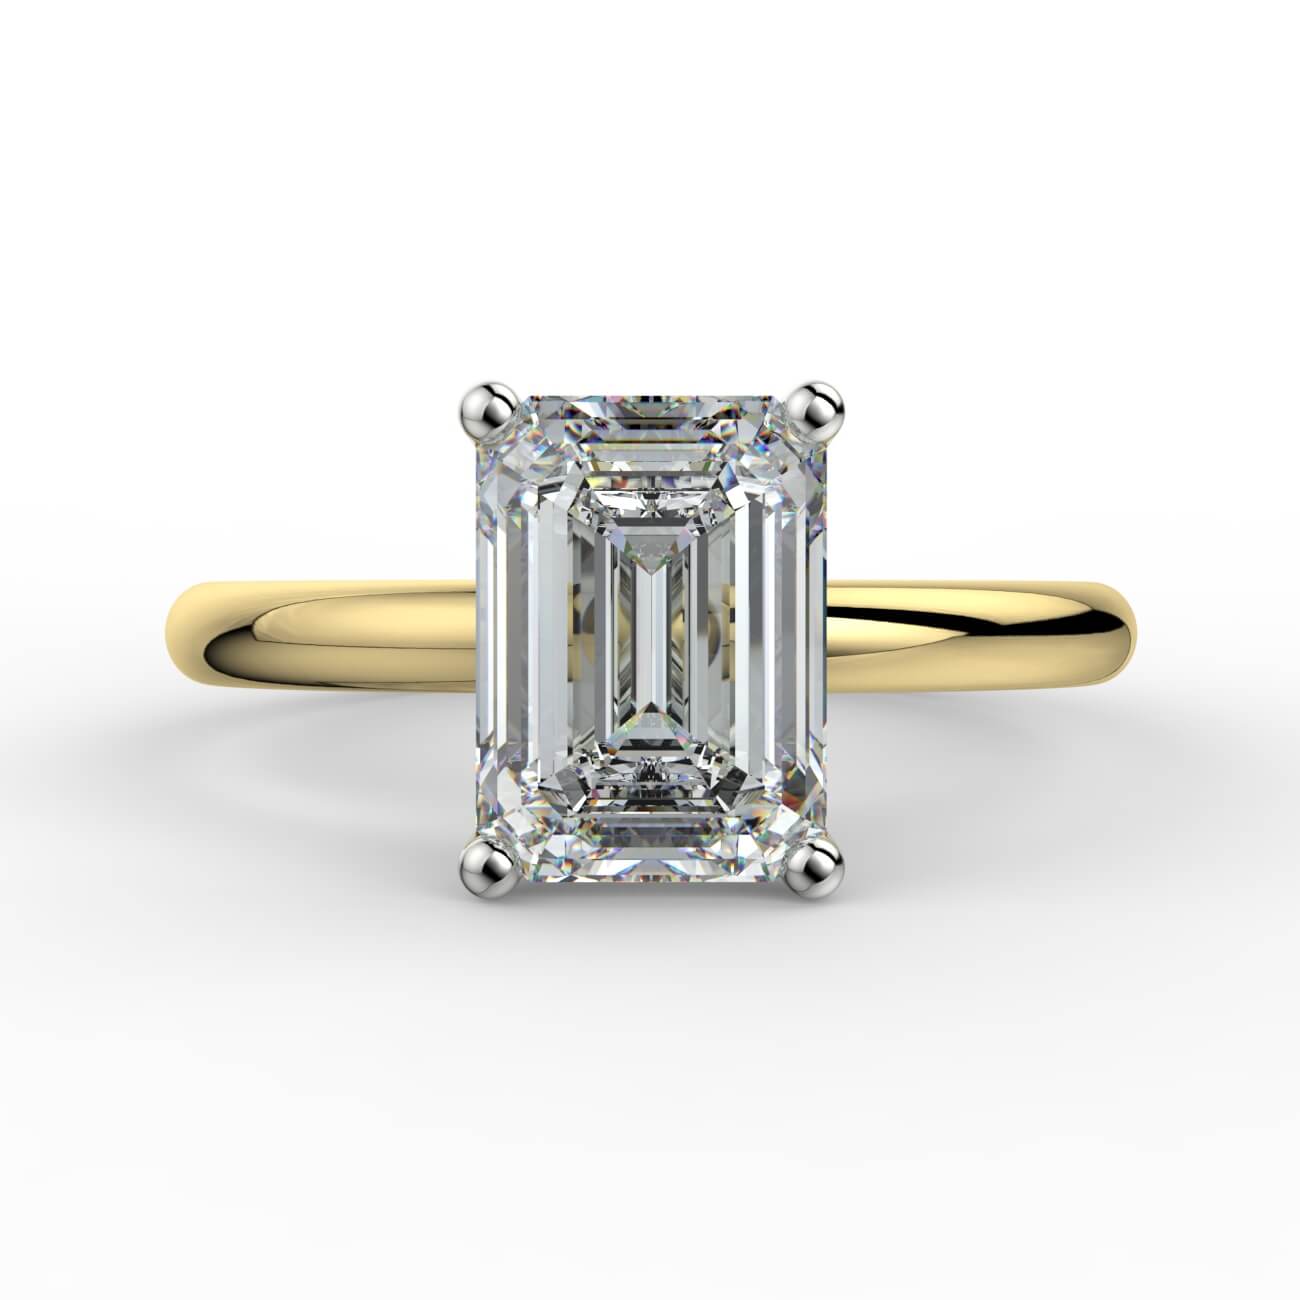 Comfort fit 4 claw emerald cut solitaire diamond ring in white and yellow gold – Australian Diamond Network